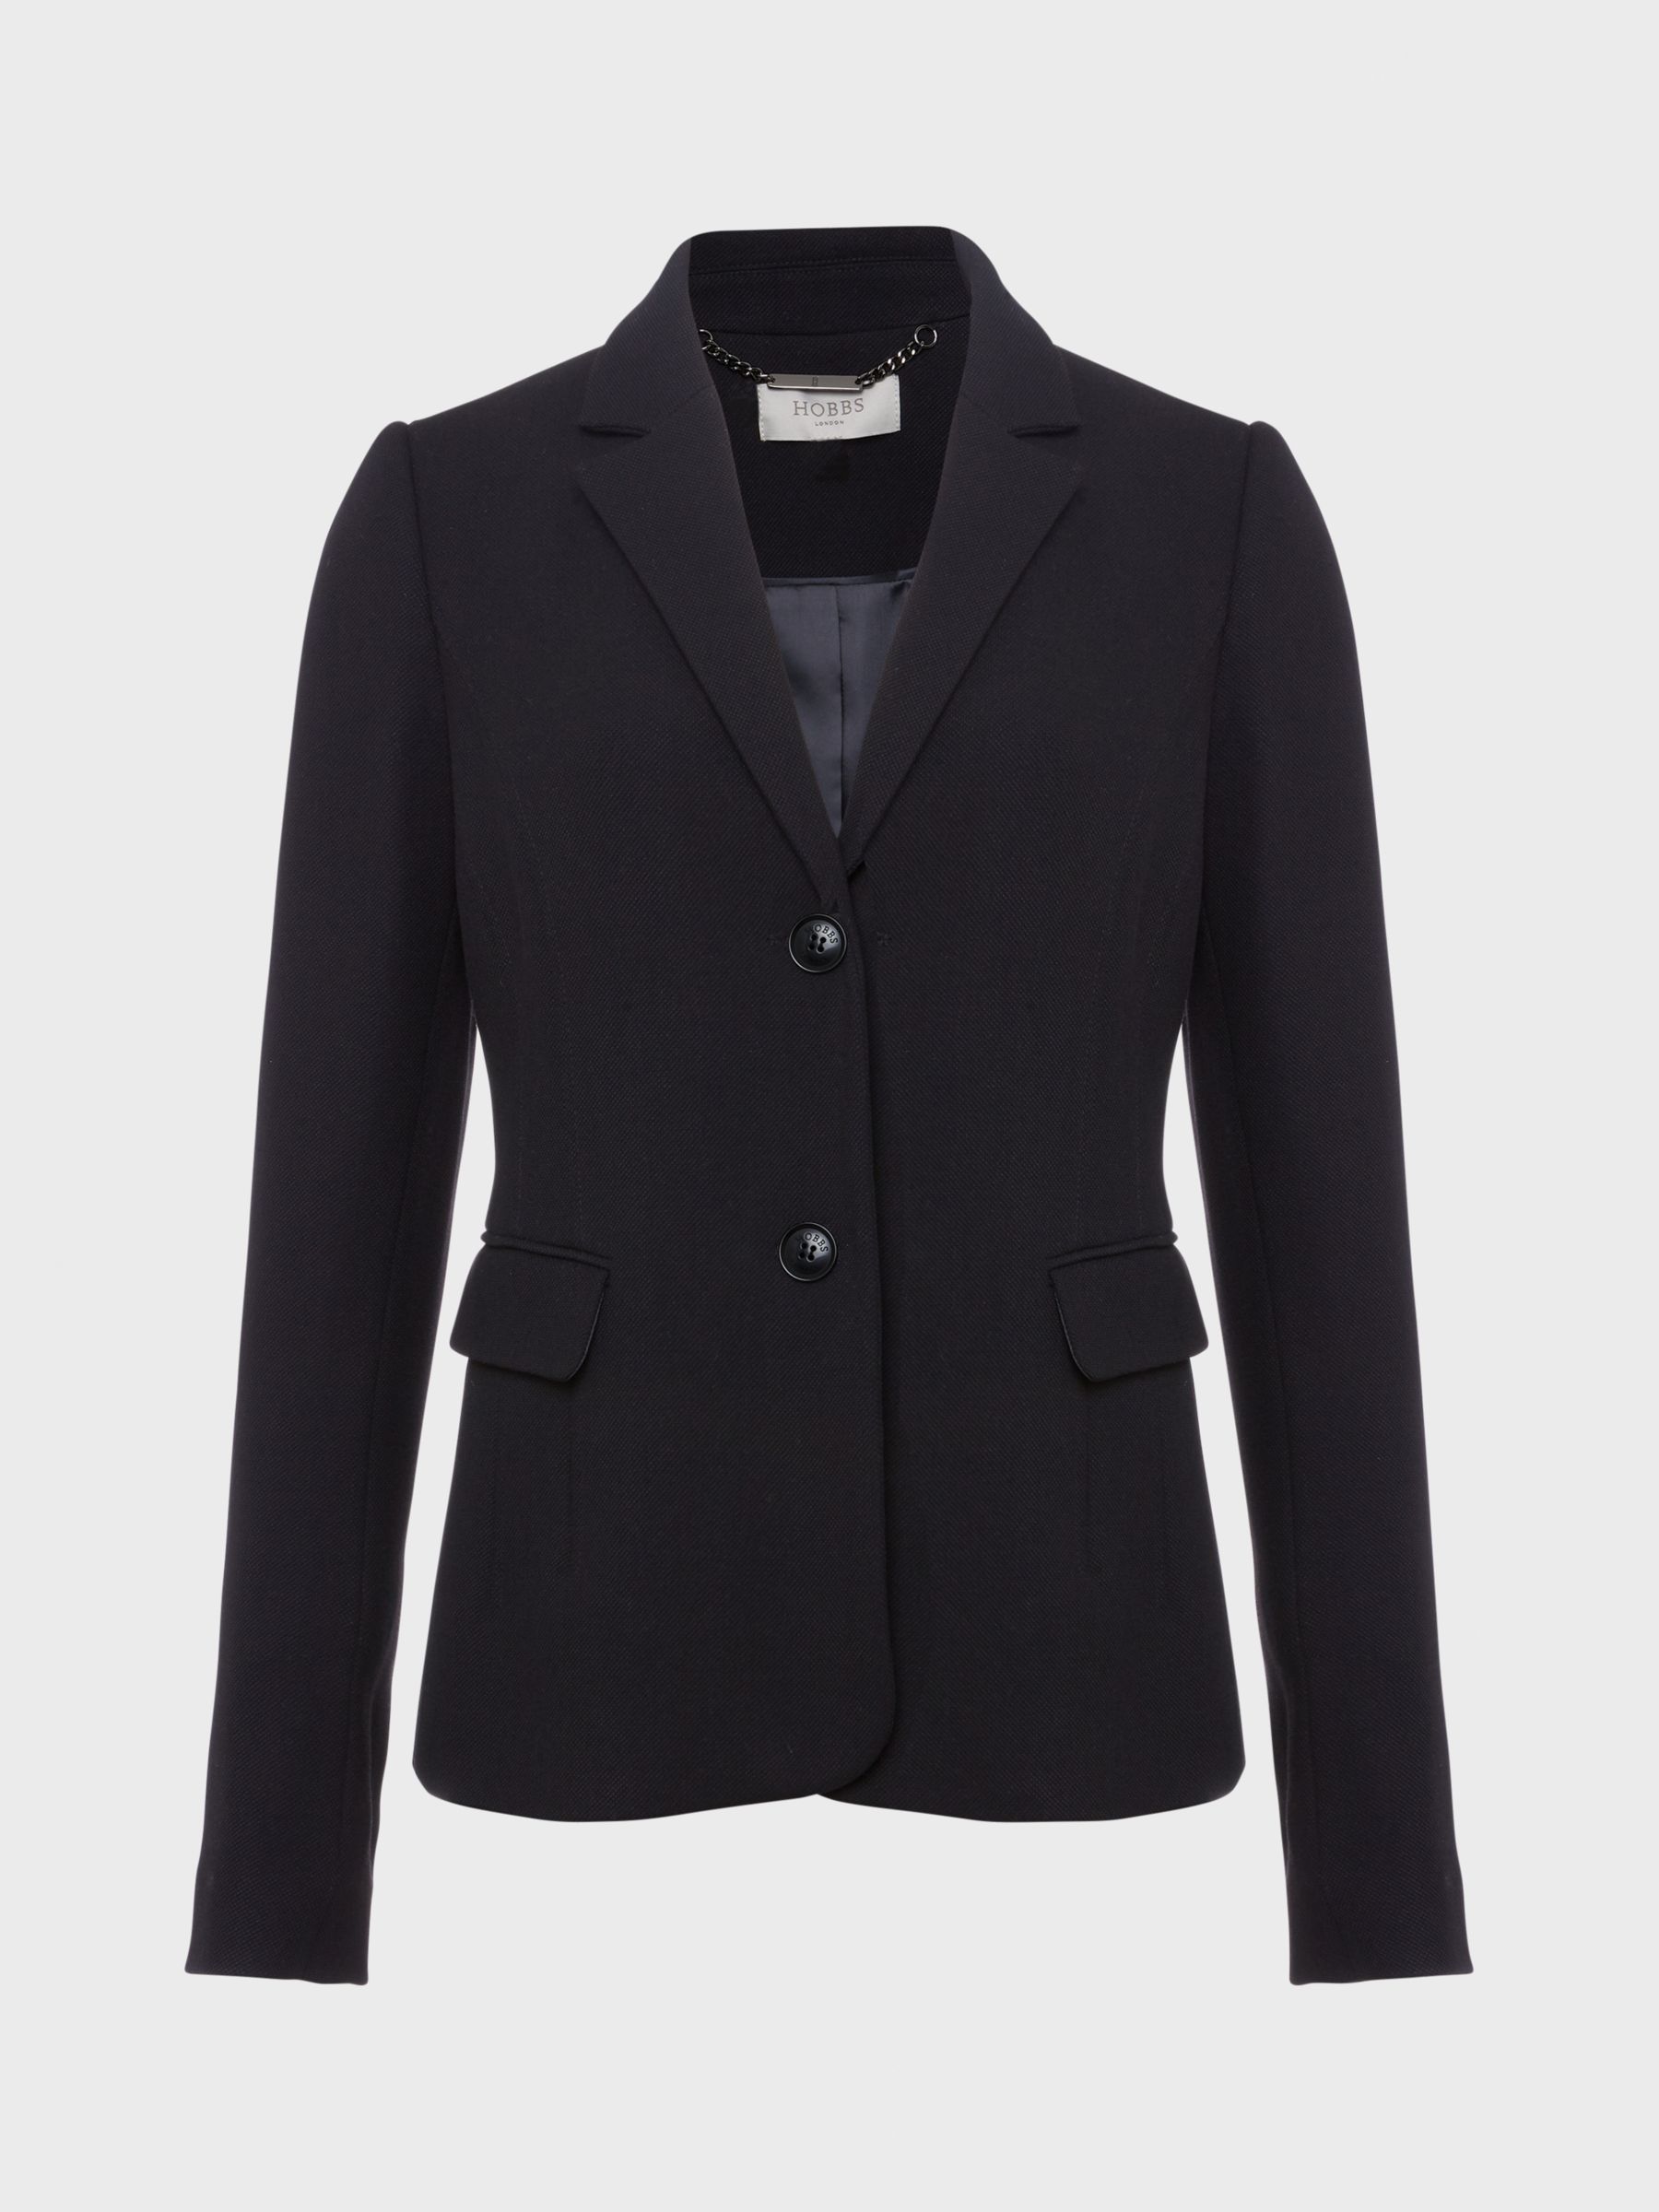 Hobbs Charley Contemporary Suit Jacket, Black at John Lewis & Partners